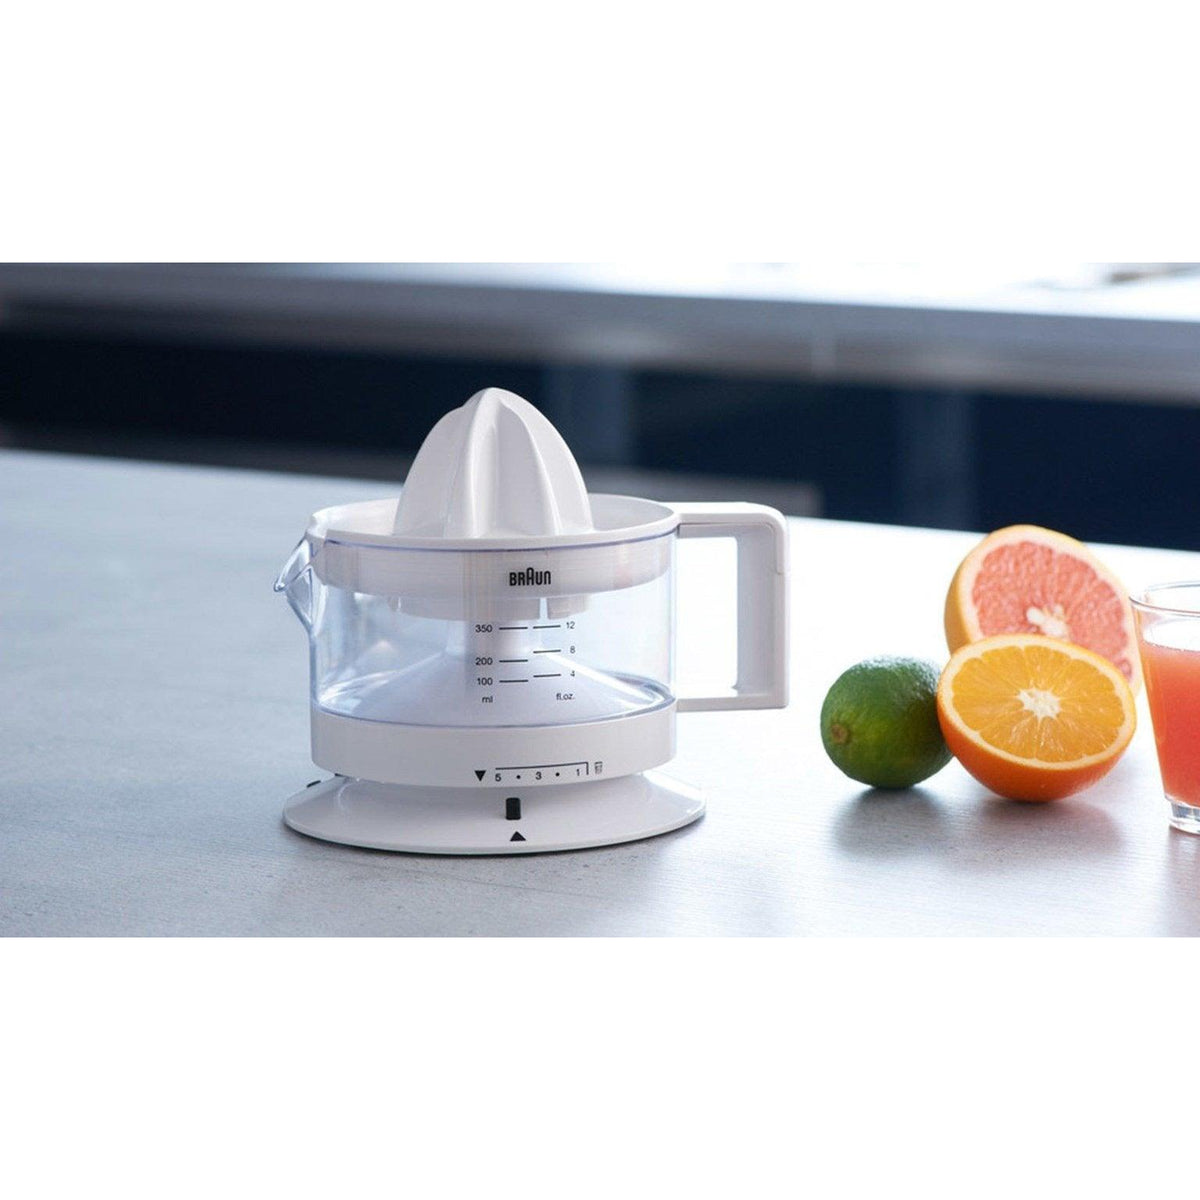 Braun Tribute Collection 20W Citrus Juicer - White | CJ3000 from DID Electrical - guaranteed Irish, guaranteed quality service. (6890746216636)